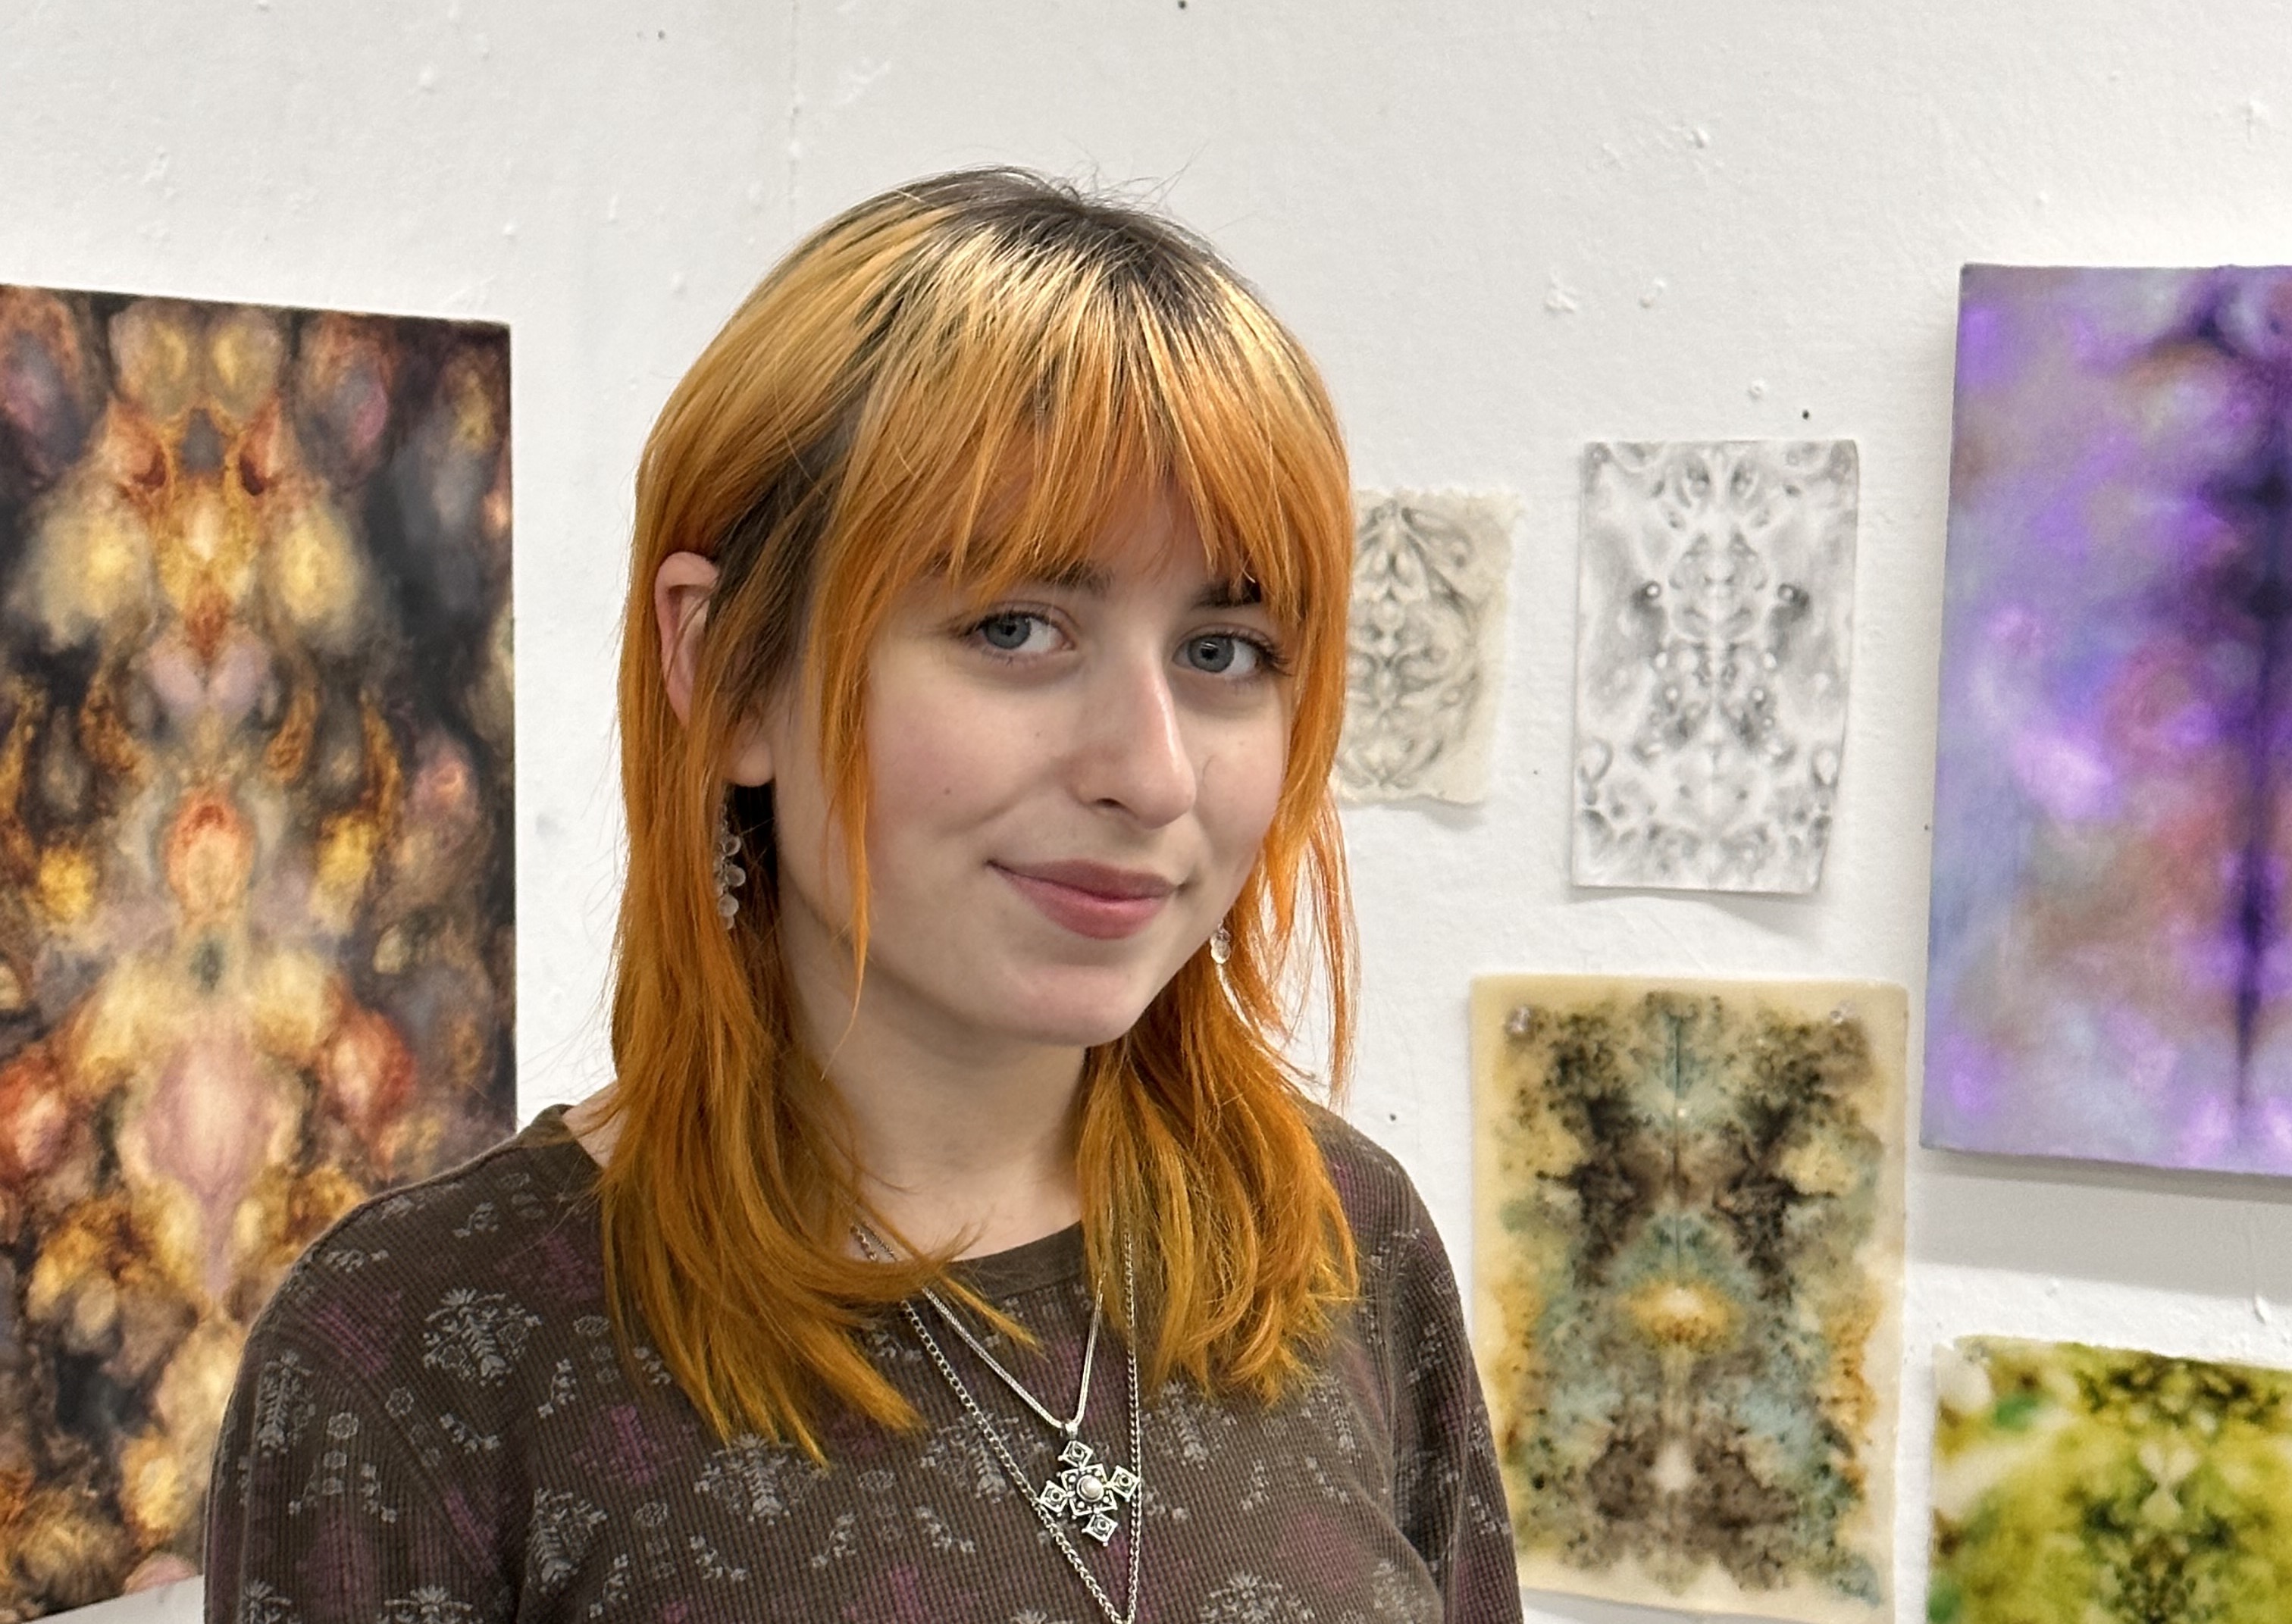 A person with bleached blonde and orange hair standing in front of painted canvasses hung on a wall